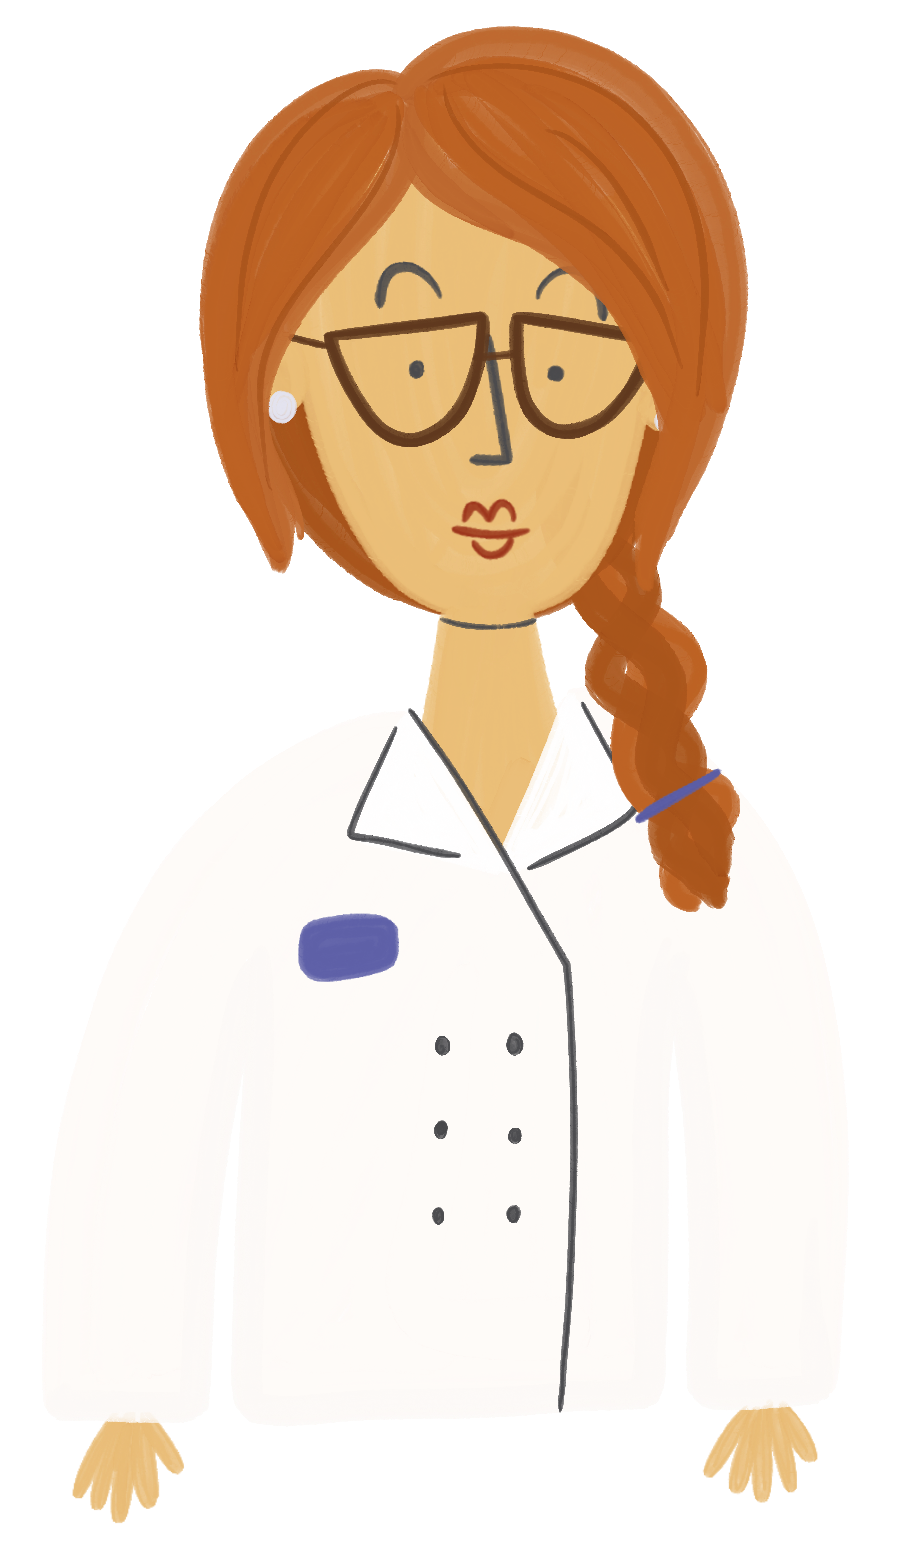 illustration of a woman in a lab coat